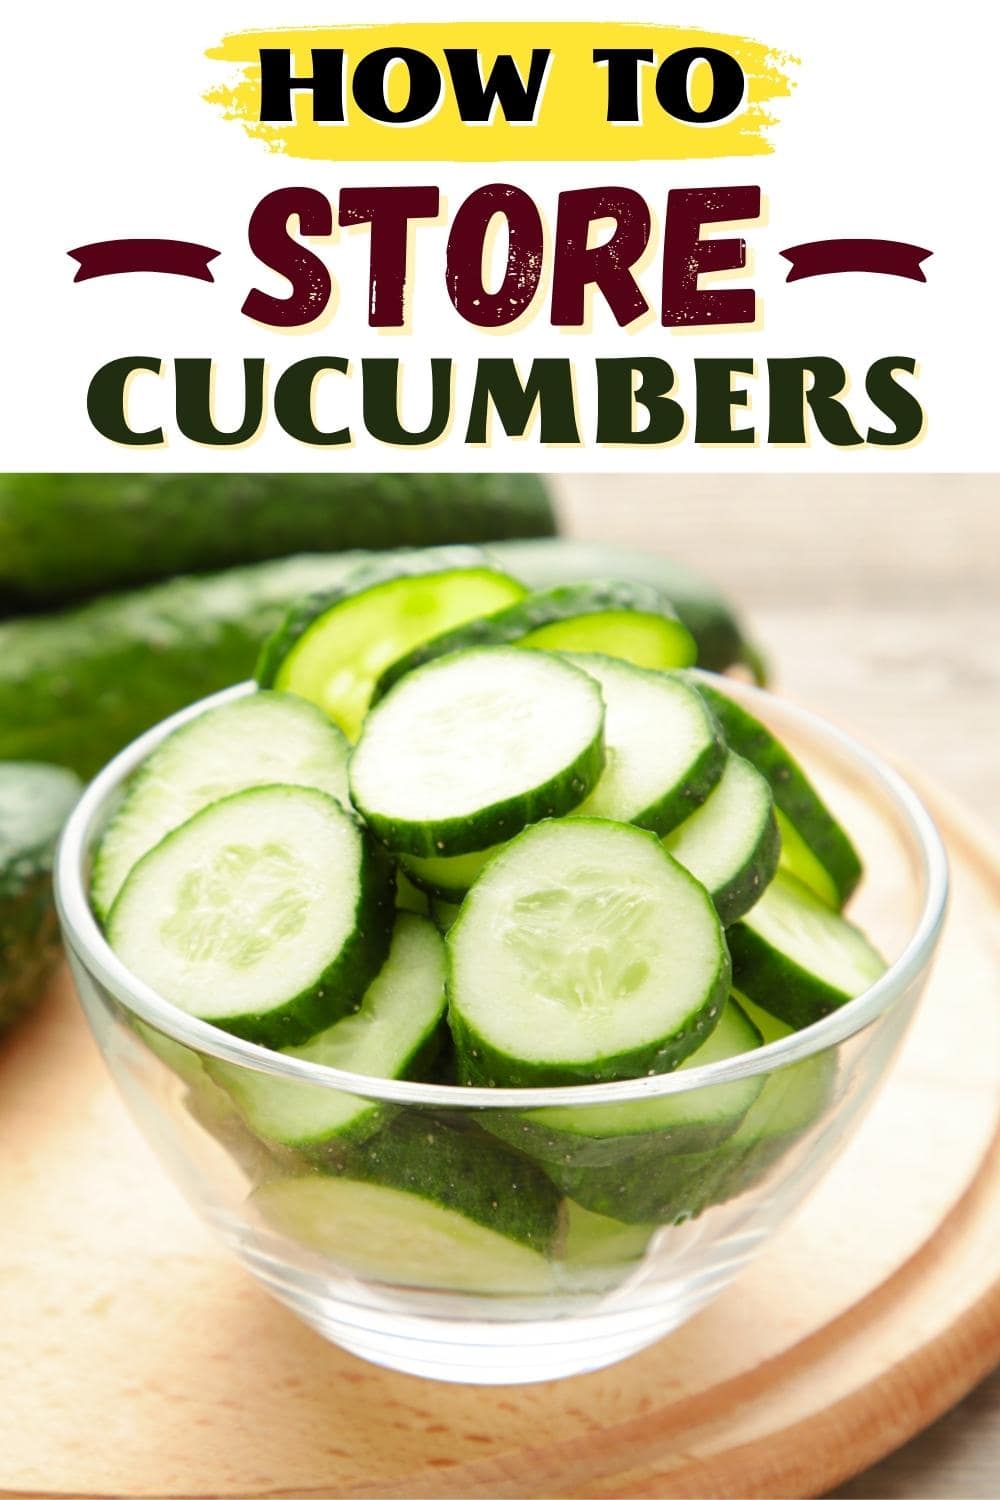 How to Store Cucumbers